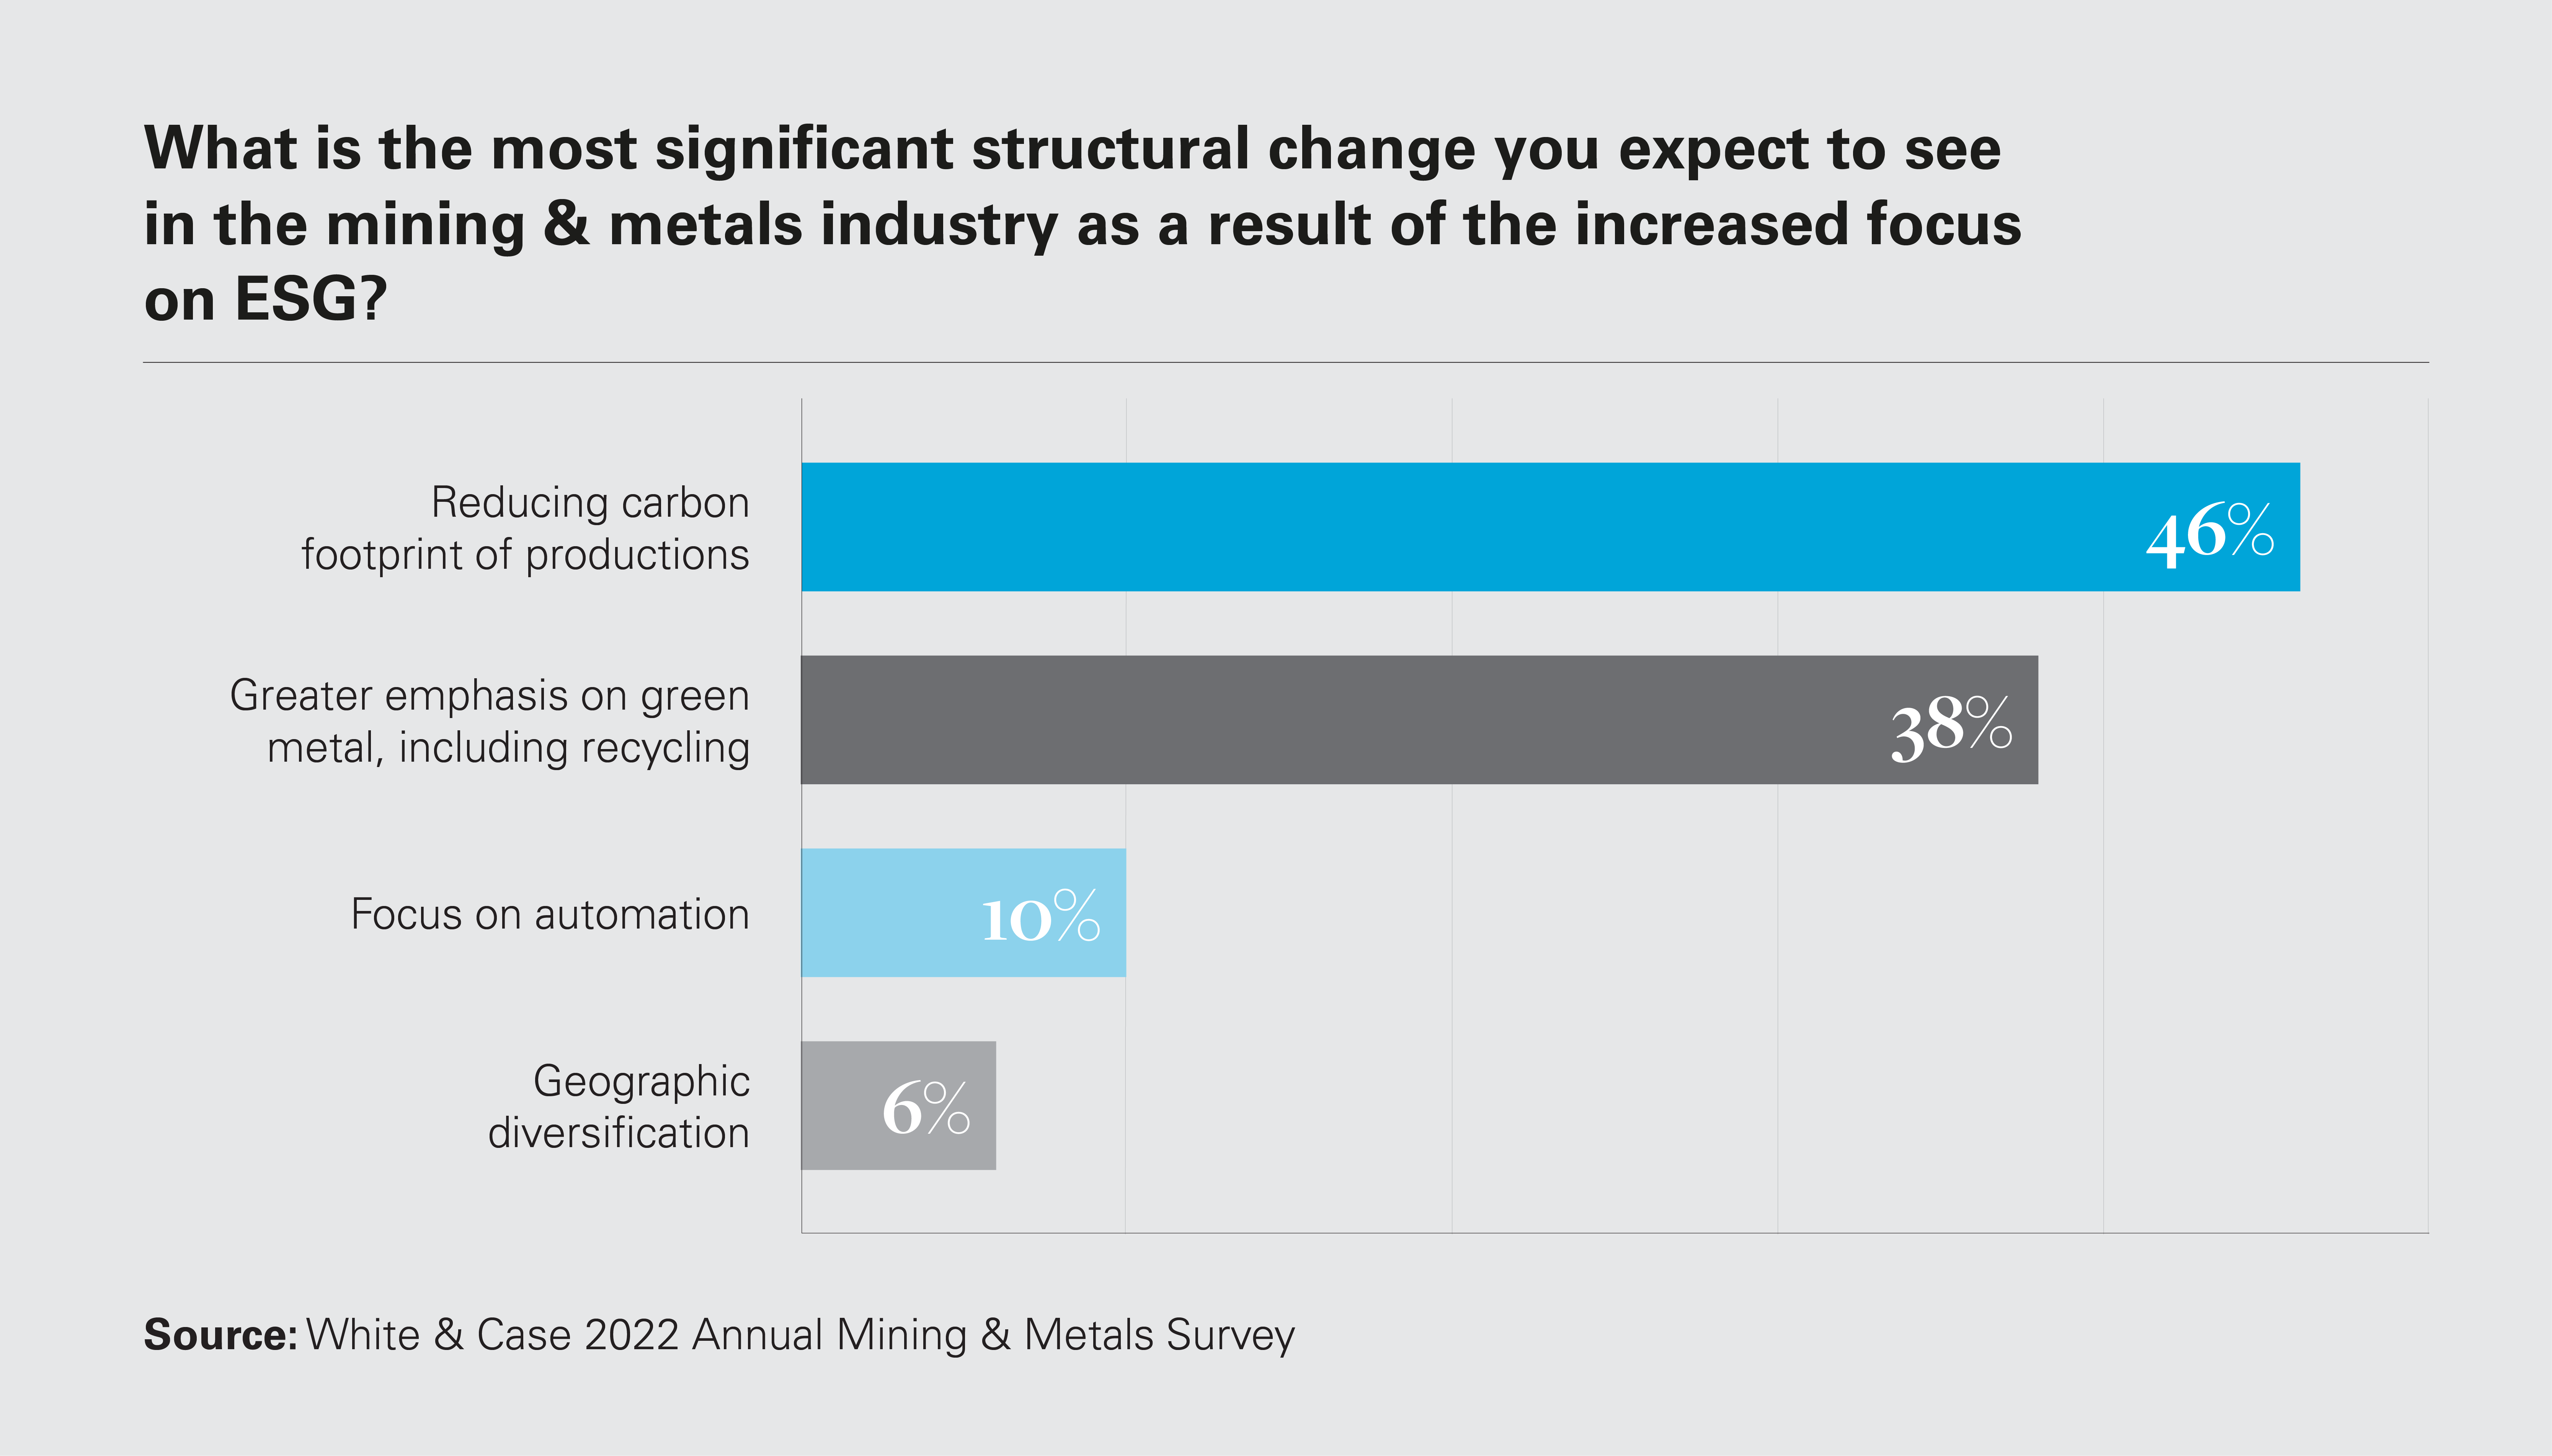 What is the most significant structural change you expect to see in the mining & metals industry as a result of the increased focus on ESG?